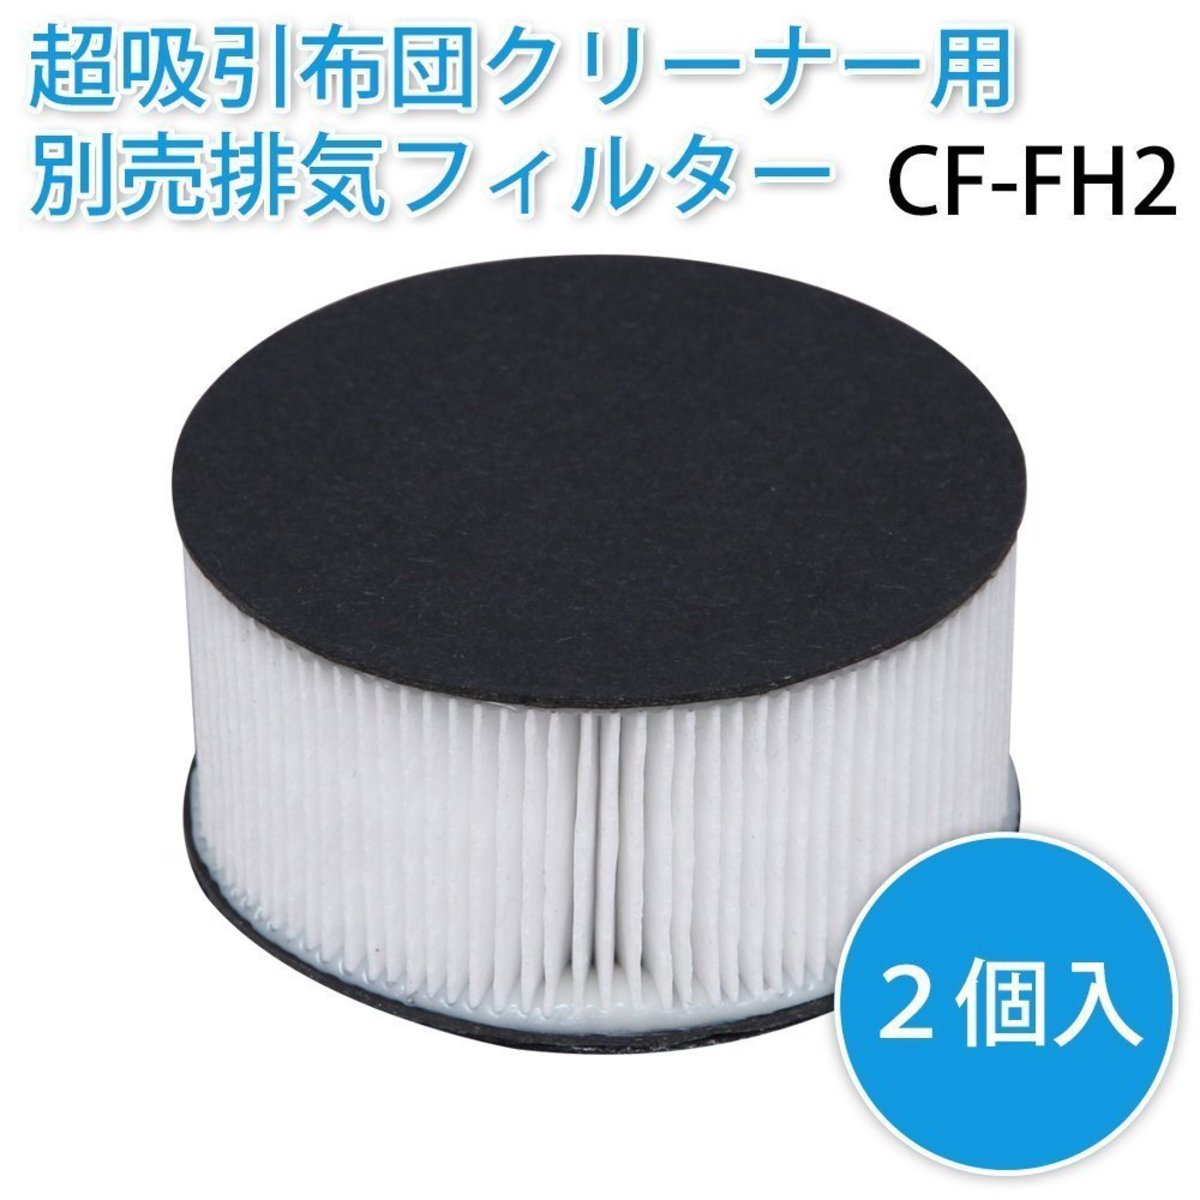 IRIS - CF-FH2 IC-FAC2/FAC3 Ultra-lightweight dust collector dedicated HEPA antibacterial dust filter (2 pieces) replacement set